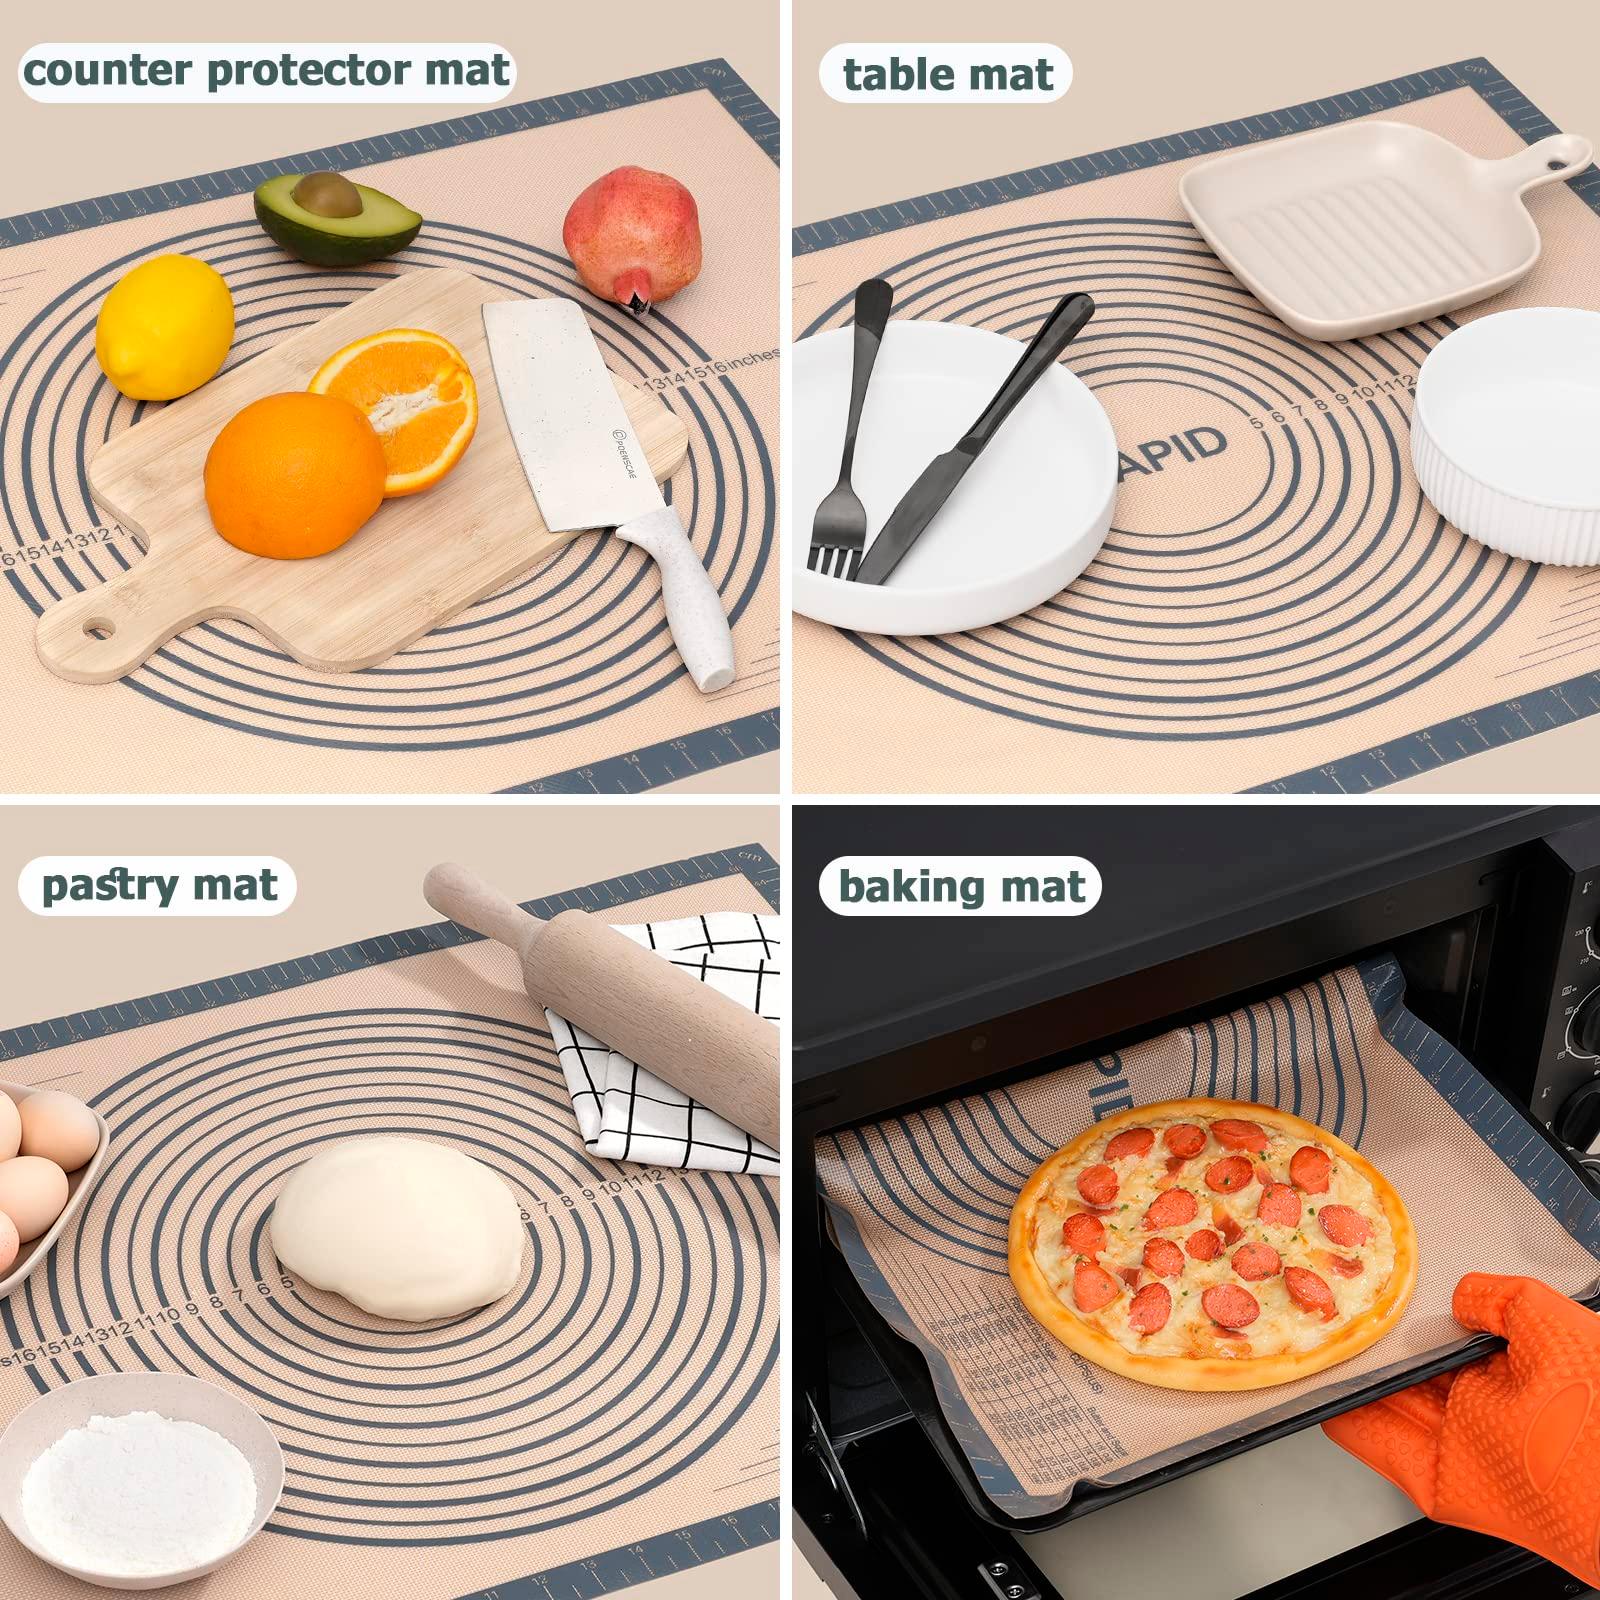 Sapid Extra Thick Silicone Pastry Mat Non-slip with Measurements for Non-stick Silicone Baking Mat Extra Large, Dough Rolling, Pie Crust, Kneading Mats, Countertop, Placement Mats (24" x 36", Gray) - CookCave